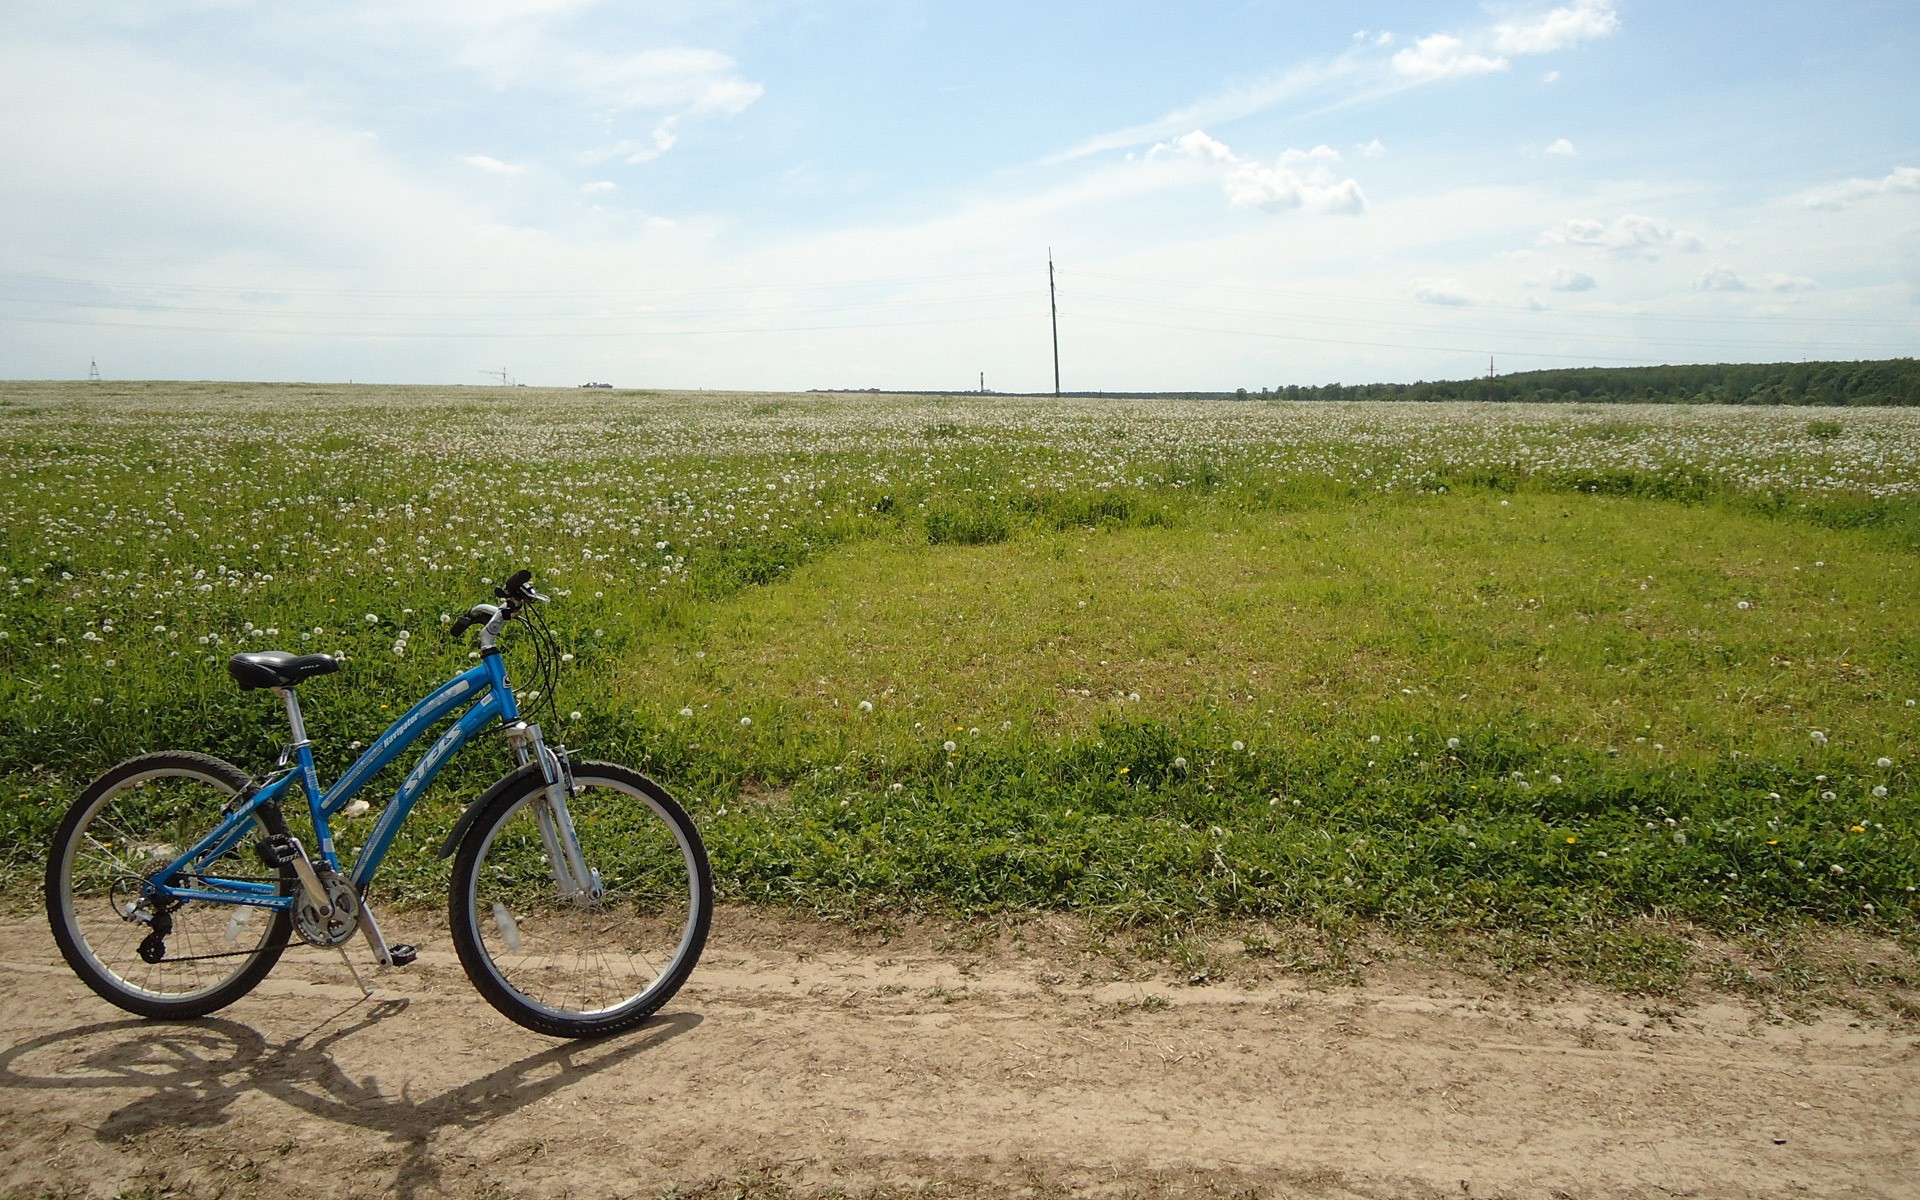 General 1920x1200 field bicycle outdoors daylight dirt road calm grass